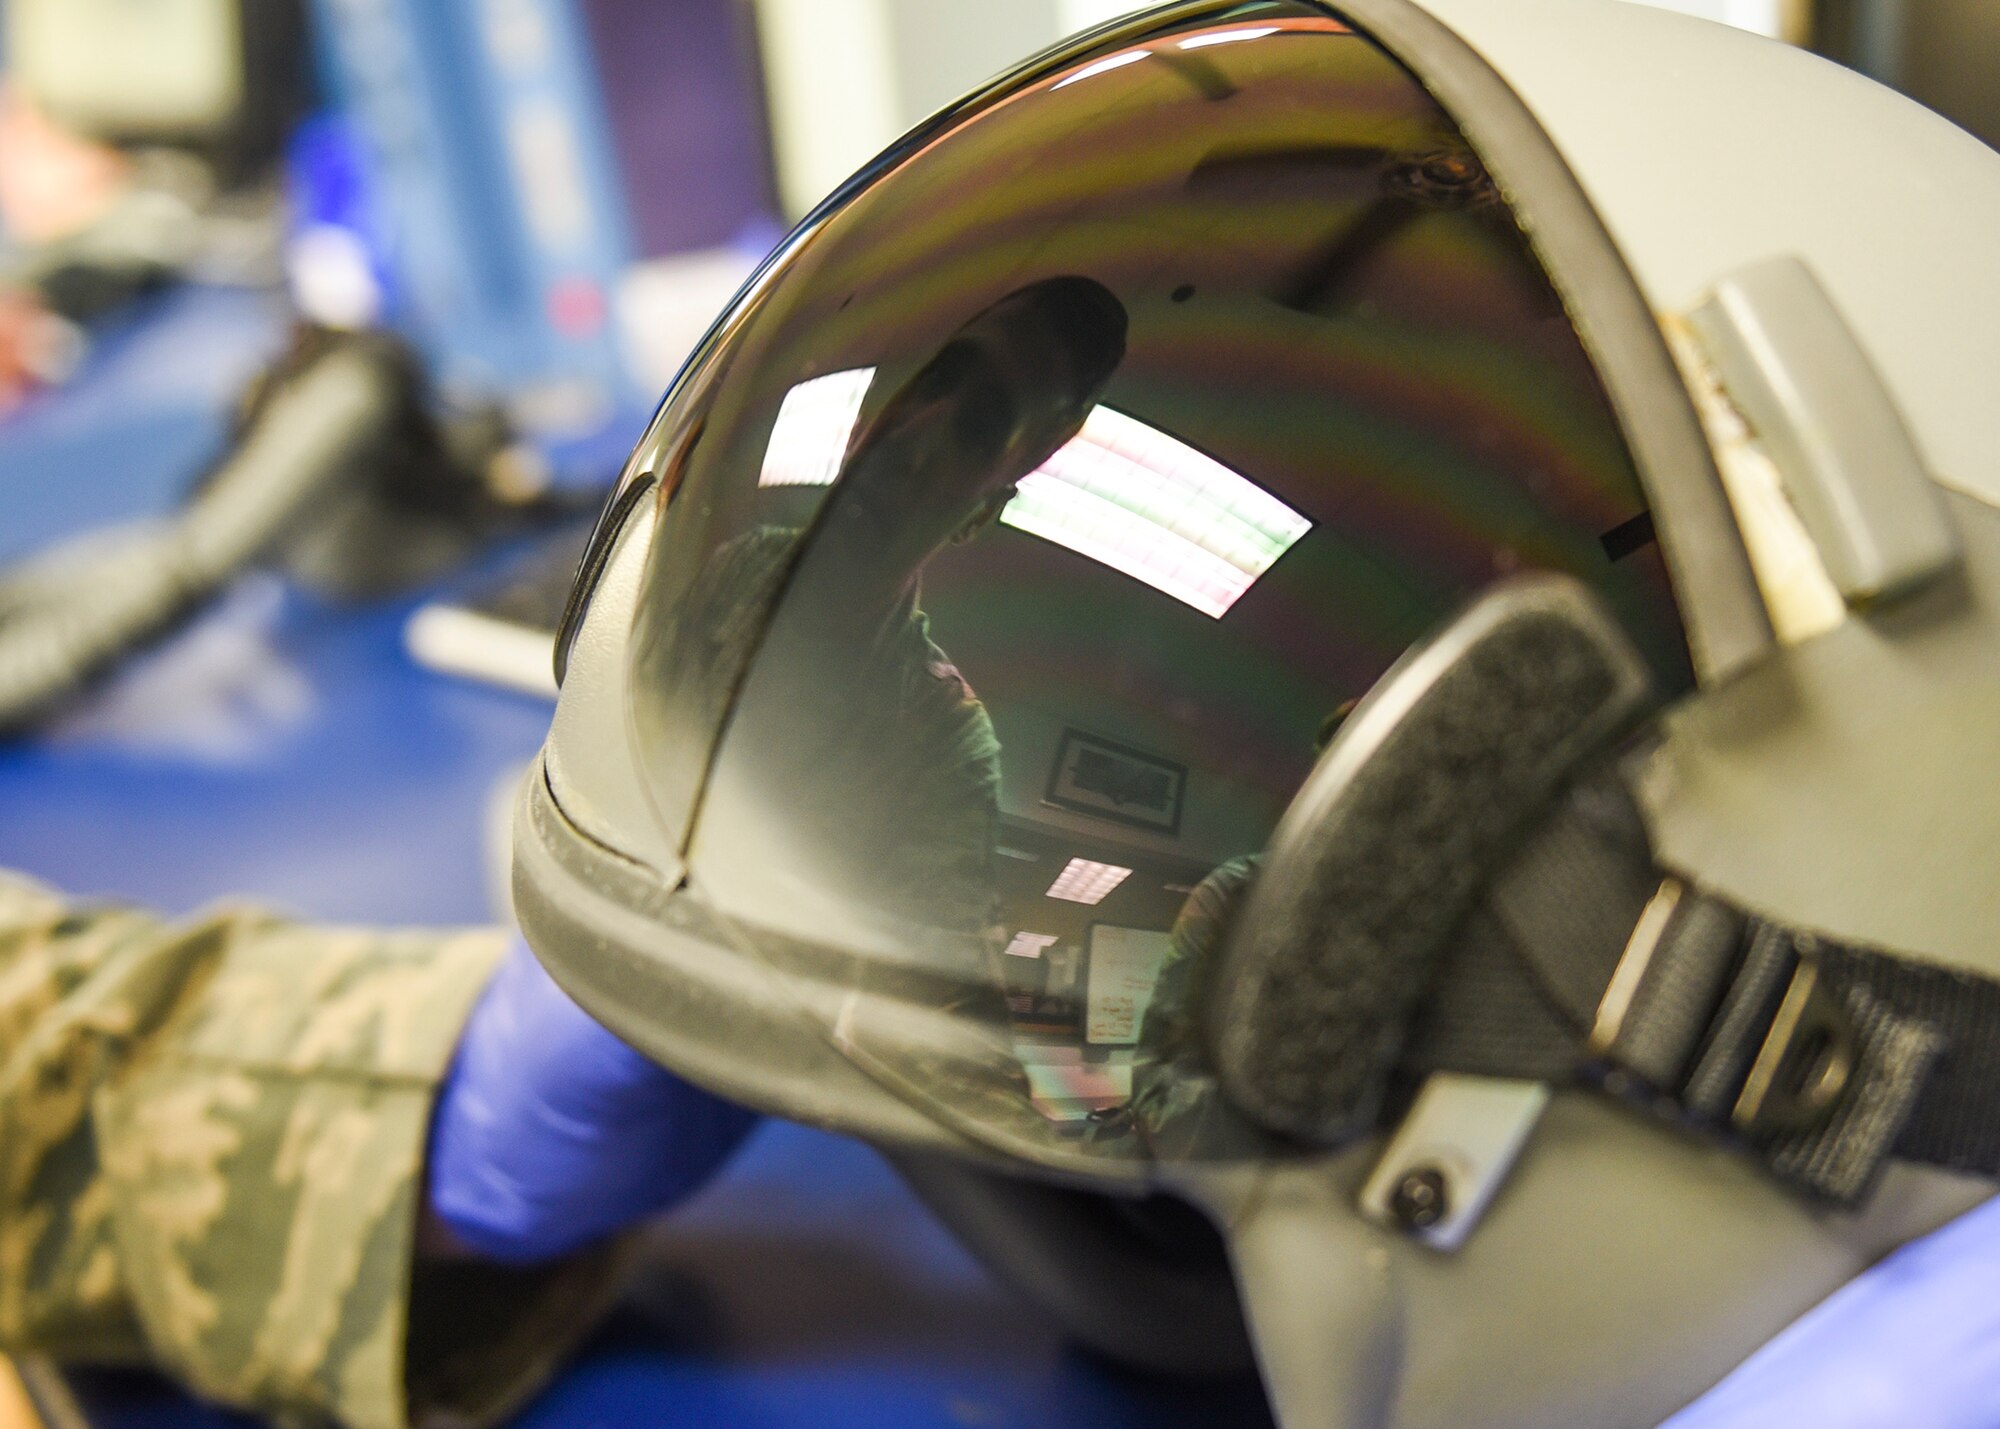 U.S. Air Force Staff Sgt. Ryan Kracher, 325th operations Support Squadron aircrew flight equipment craftsman, inspects a pilot’s helmet at Tyndall Air Force Base, Fla., Jan. 19, 2017. Aircrew flight equipment technicians inspect multiple pieces of equipment necessary for pilot safety during operations. (U.S. Air Force photo by Senior Airman Dustin Mullen/Released)